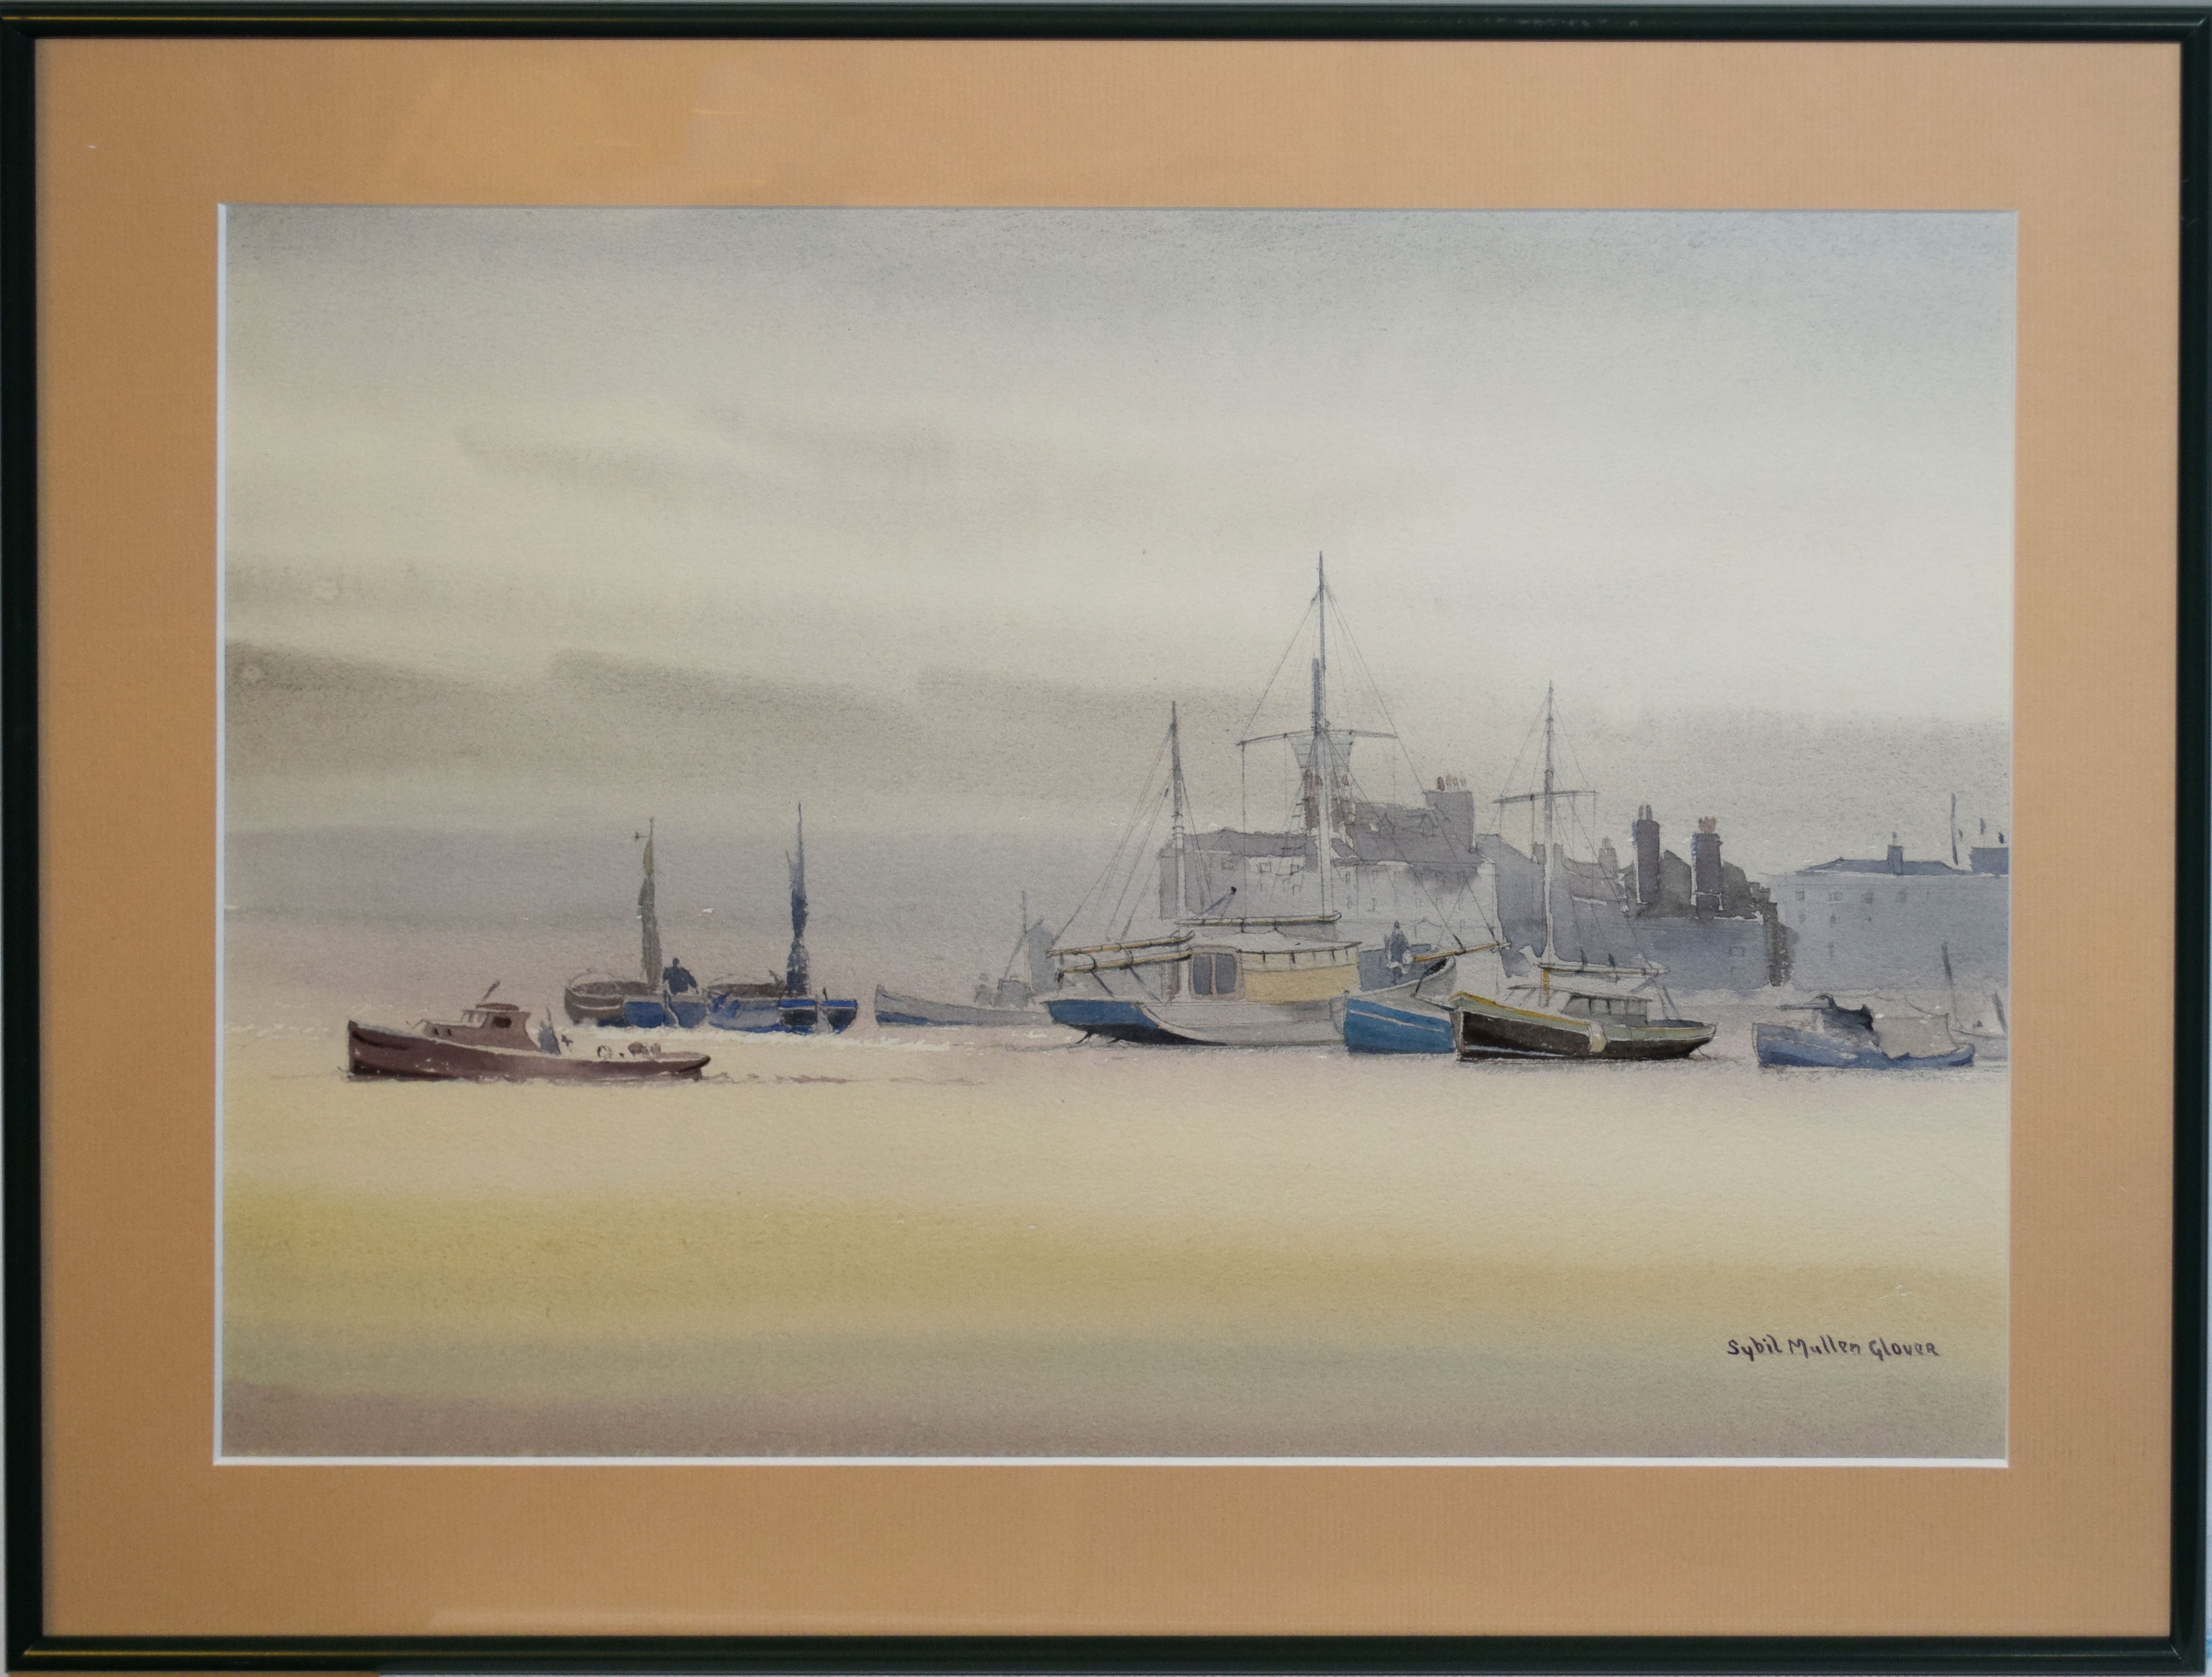 AR Sybil Mullen Glover (1908-1995), Boats in a harbour, pen, ink and watercolour, signed lower